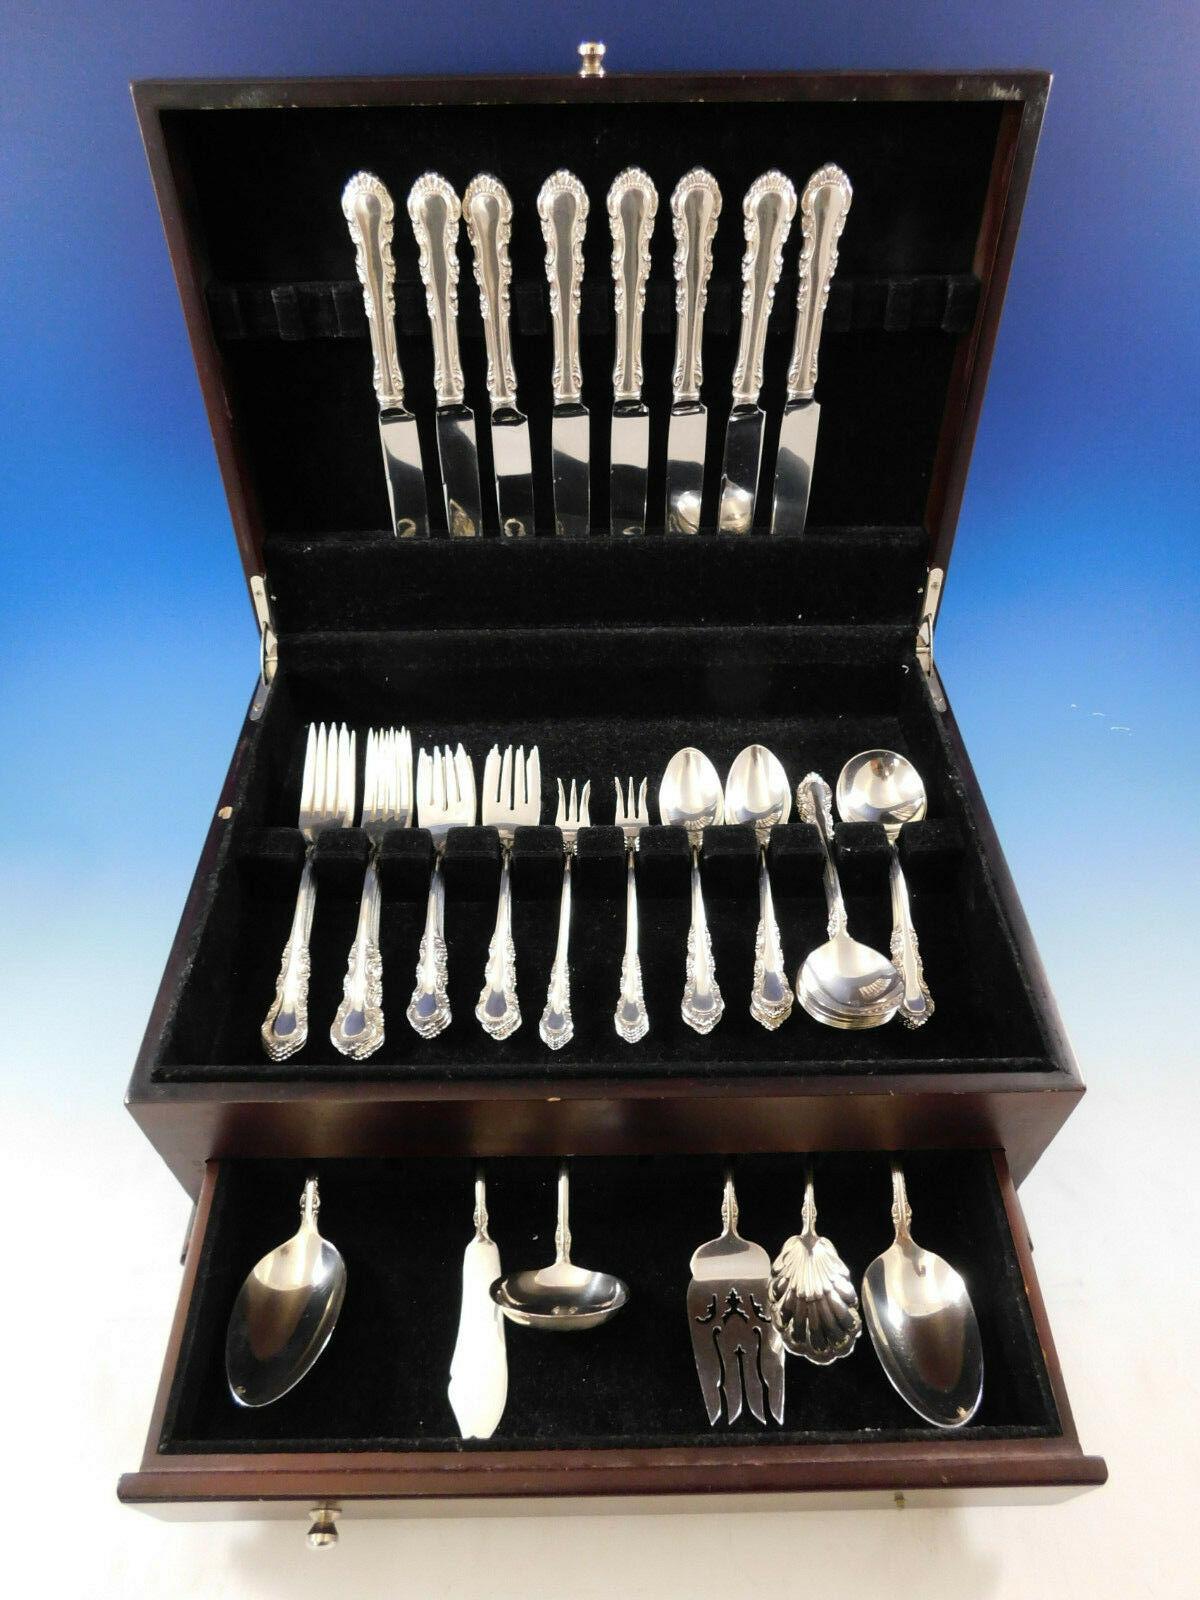 Georgian Rose by Reed & Barton sterling silver flatware set, 54 pieces. This set includes:

8 knives, 9 1/4